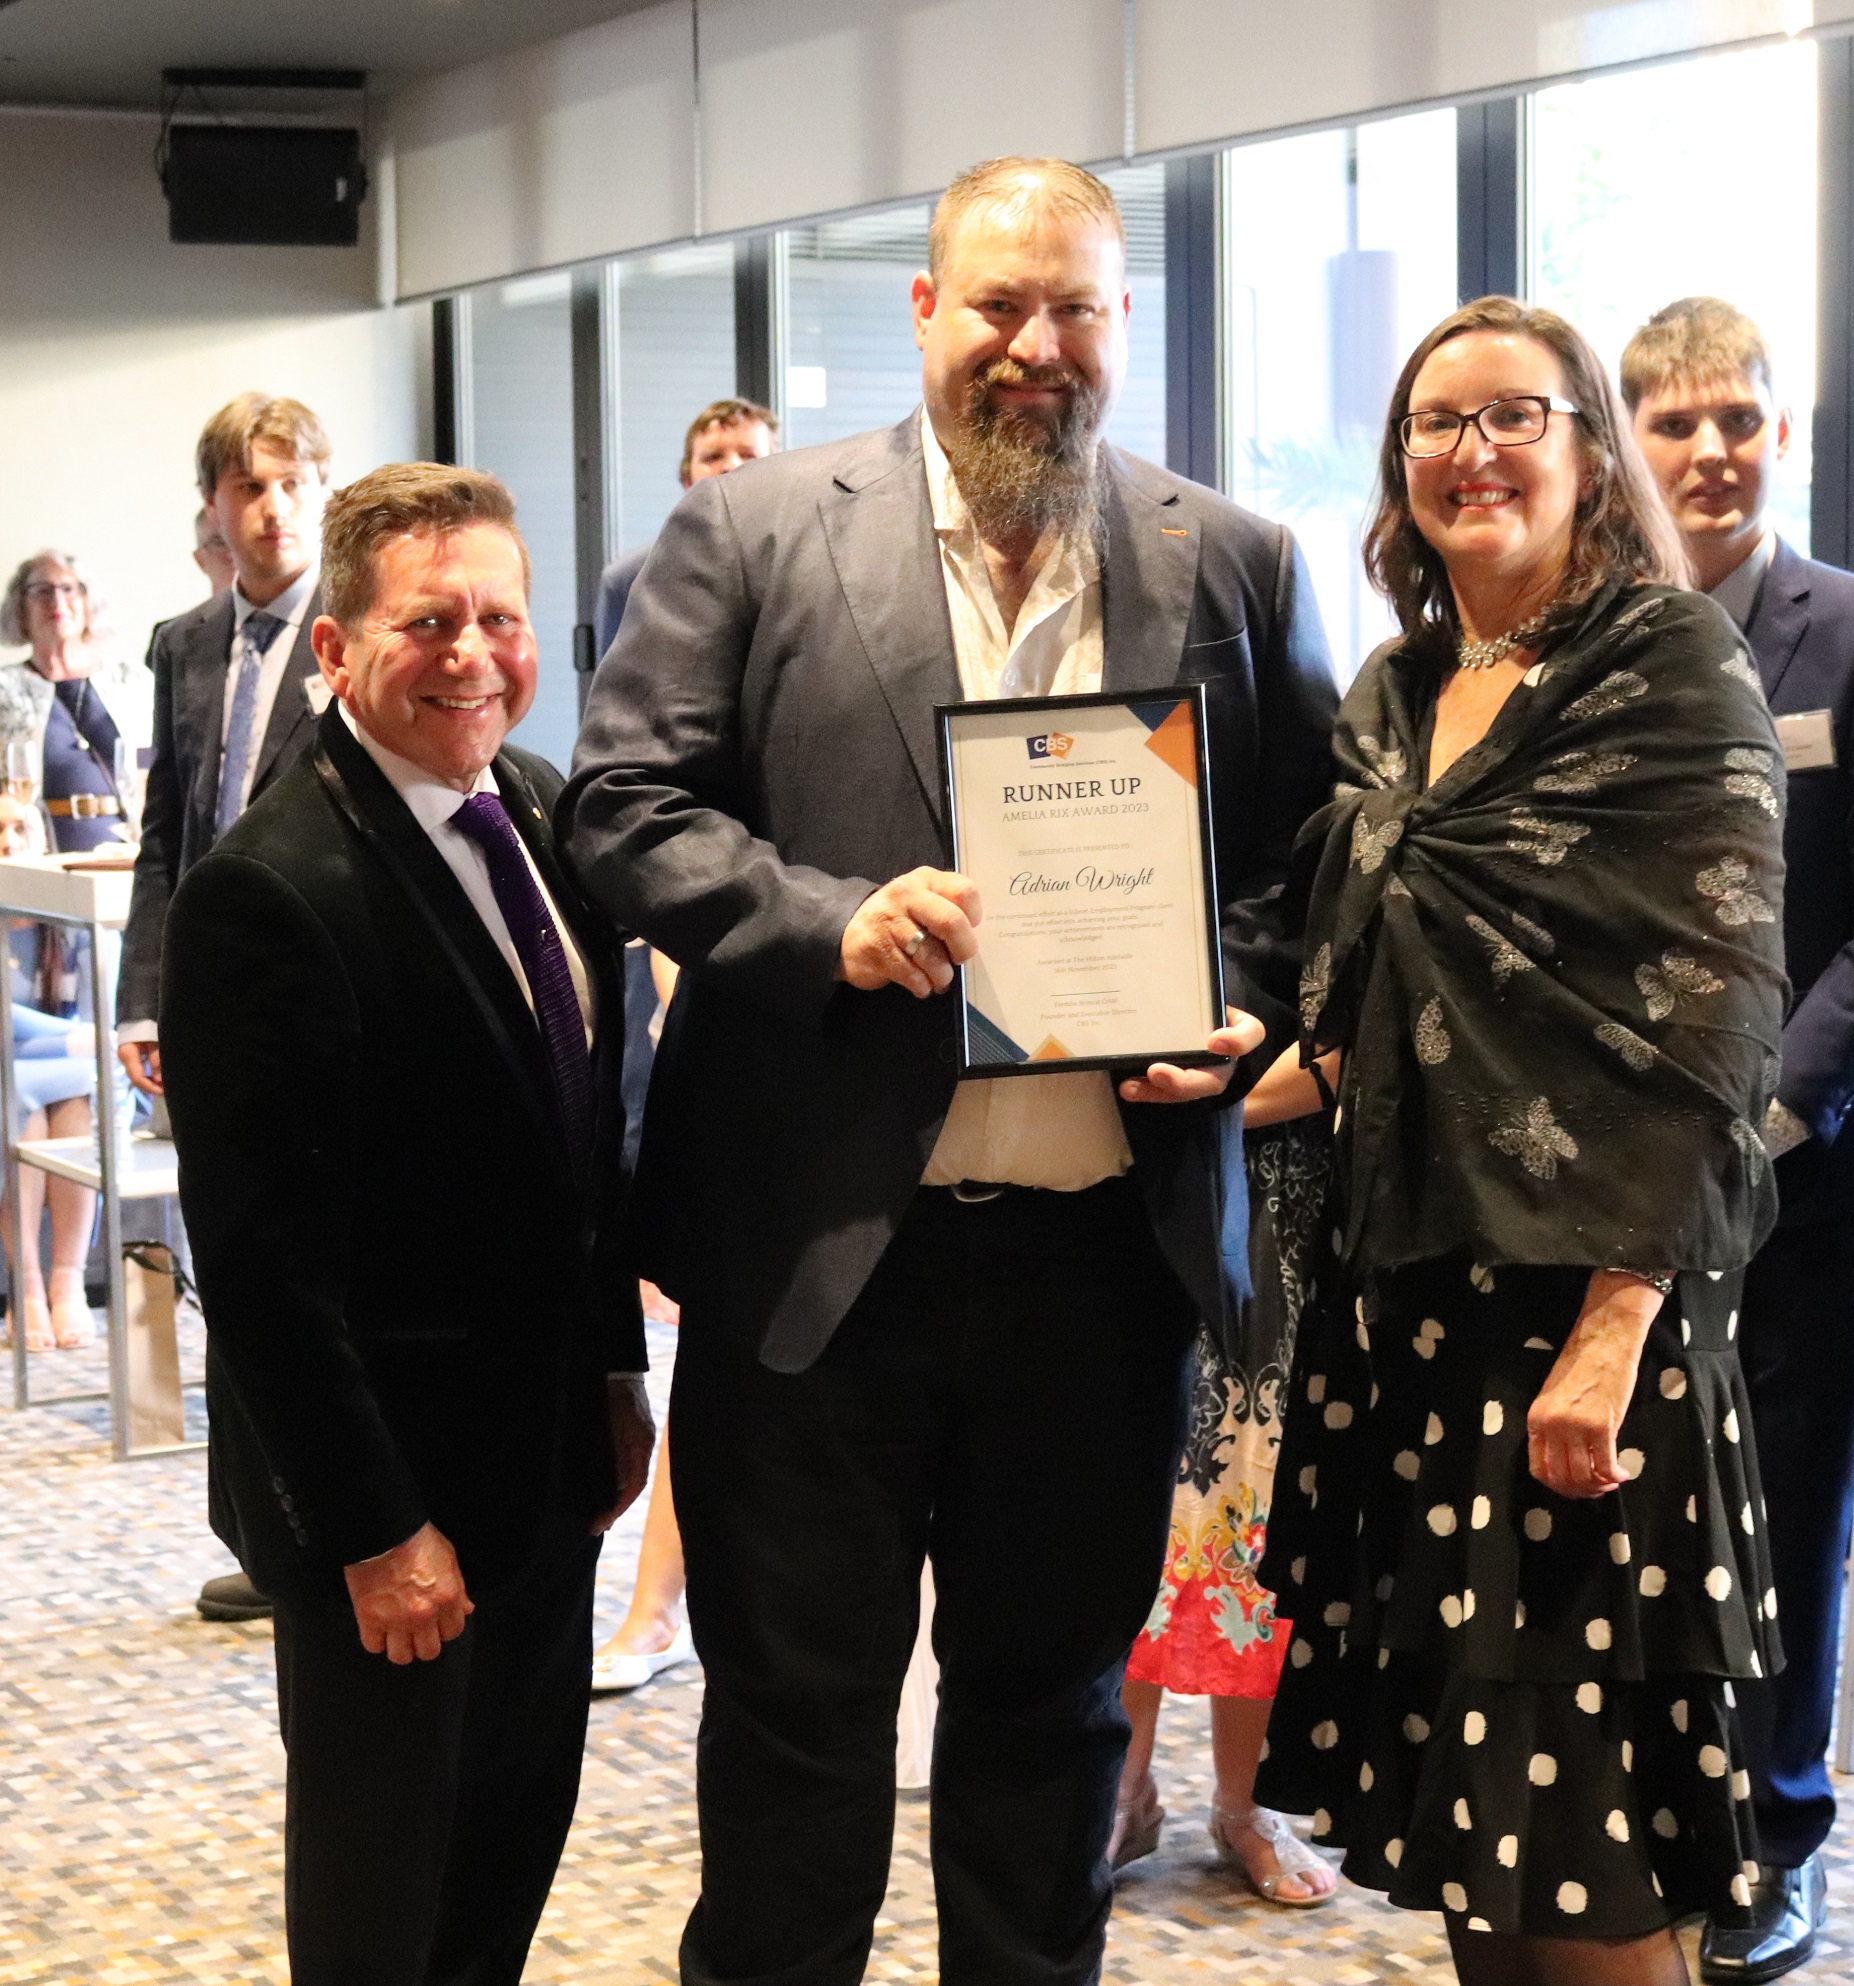 Runner up Adrian Wright with CBS Inc. Founder and Executive Director, Freddie Brincat OAM and Amelia Rix Award committee member, Caroline Manetta.